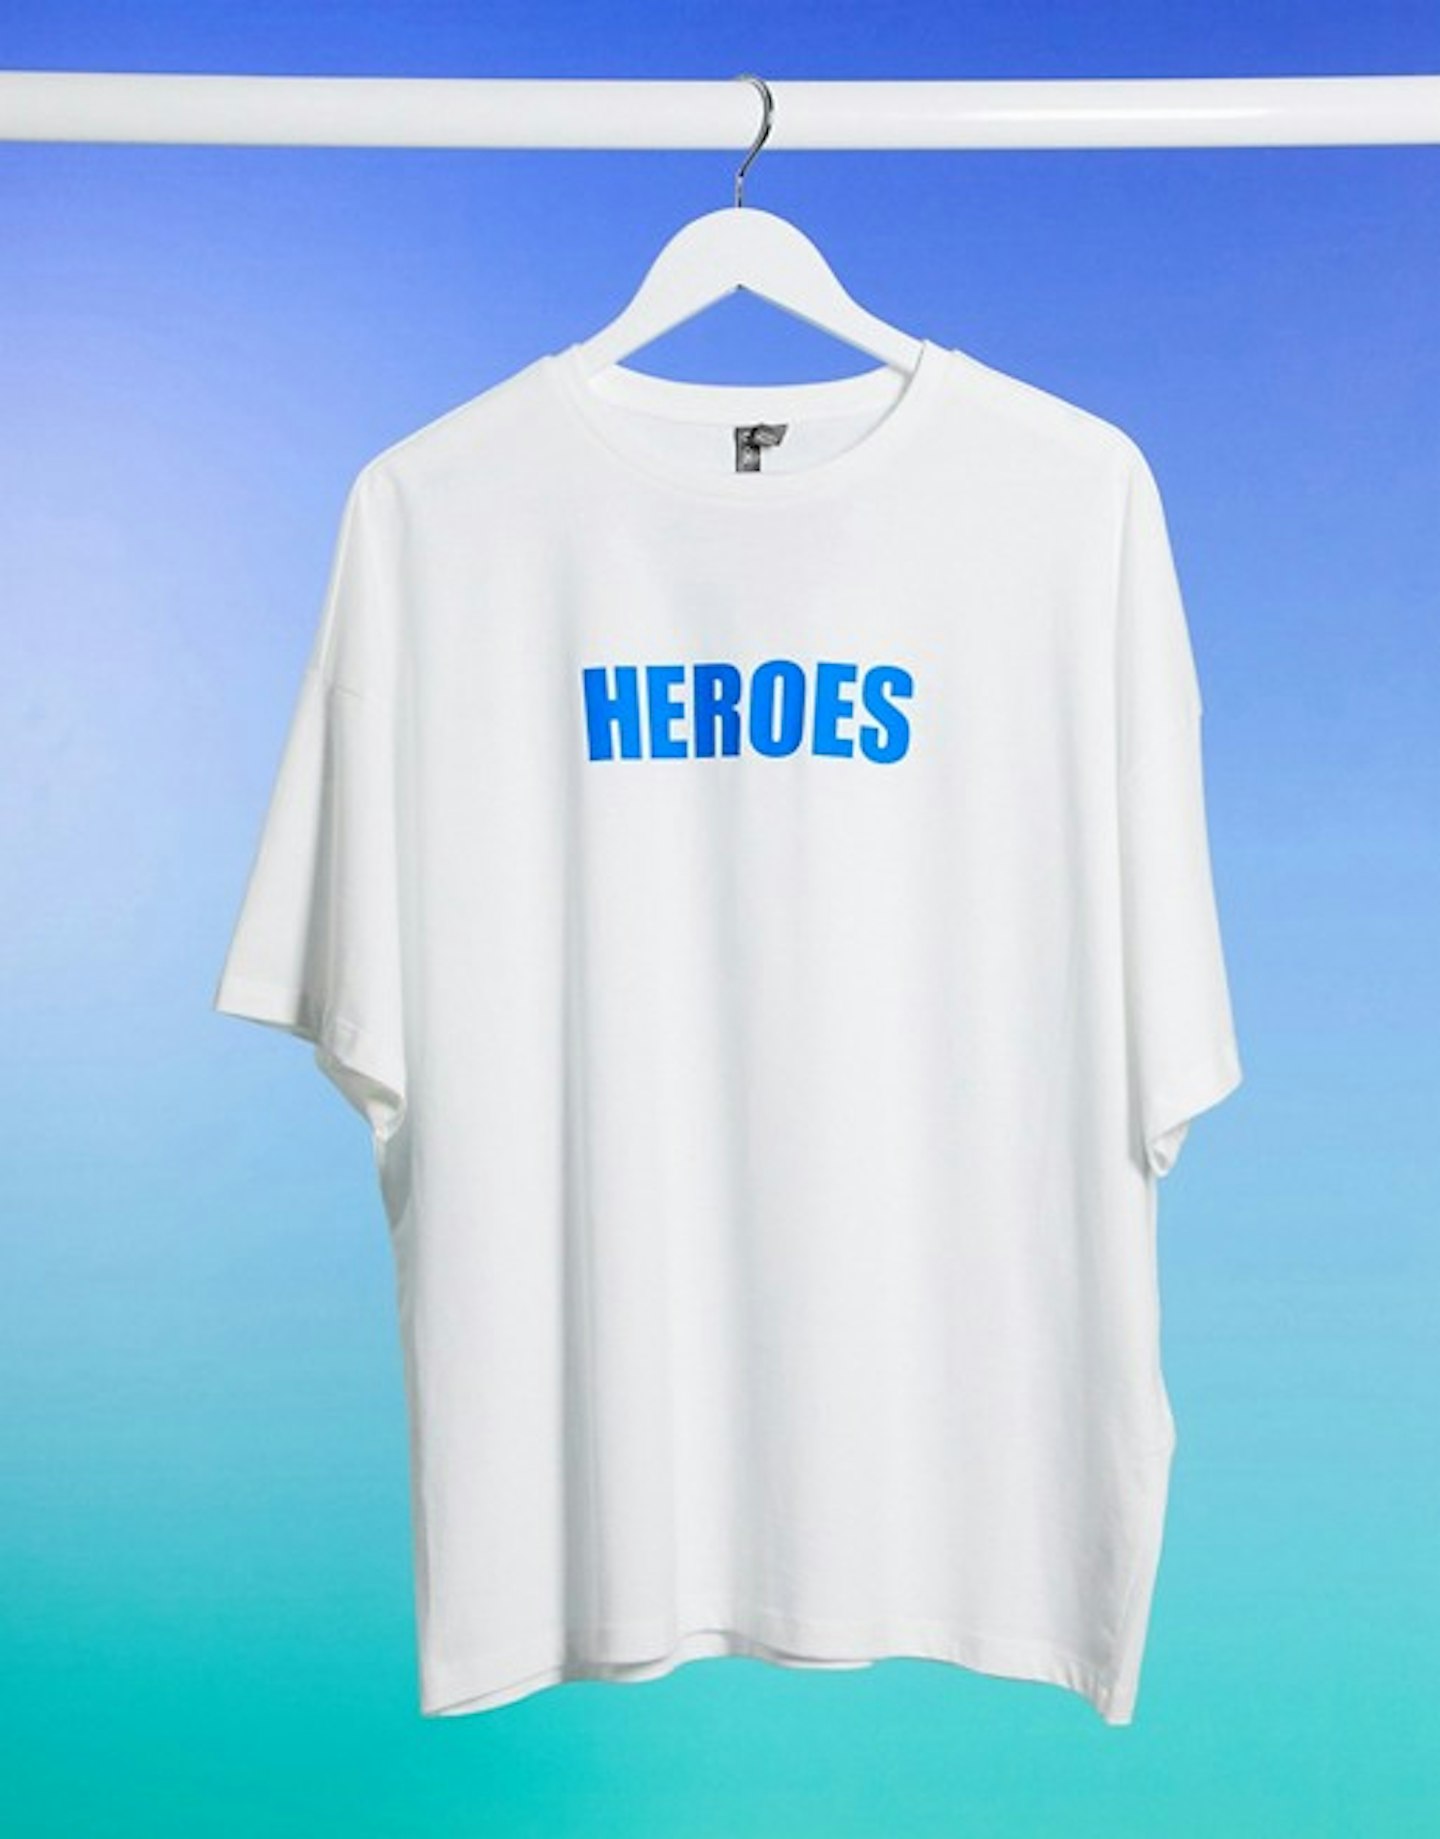 ASOS, unisex charity t-shirt with heroes print, £20